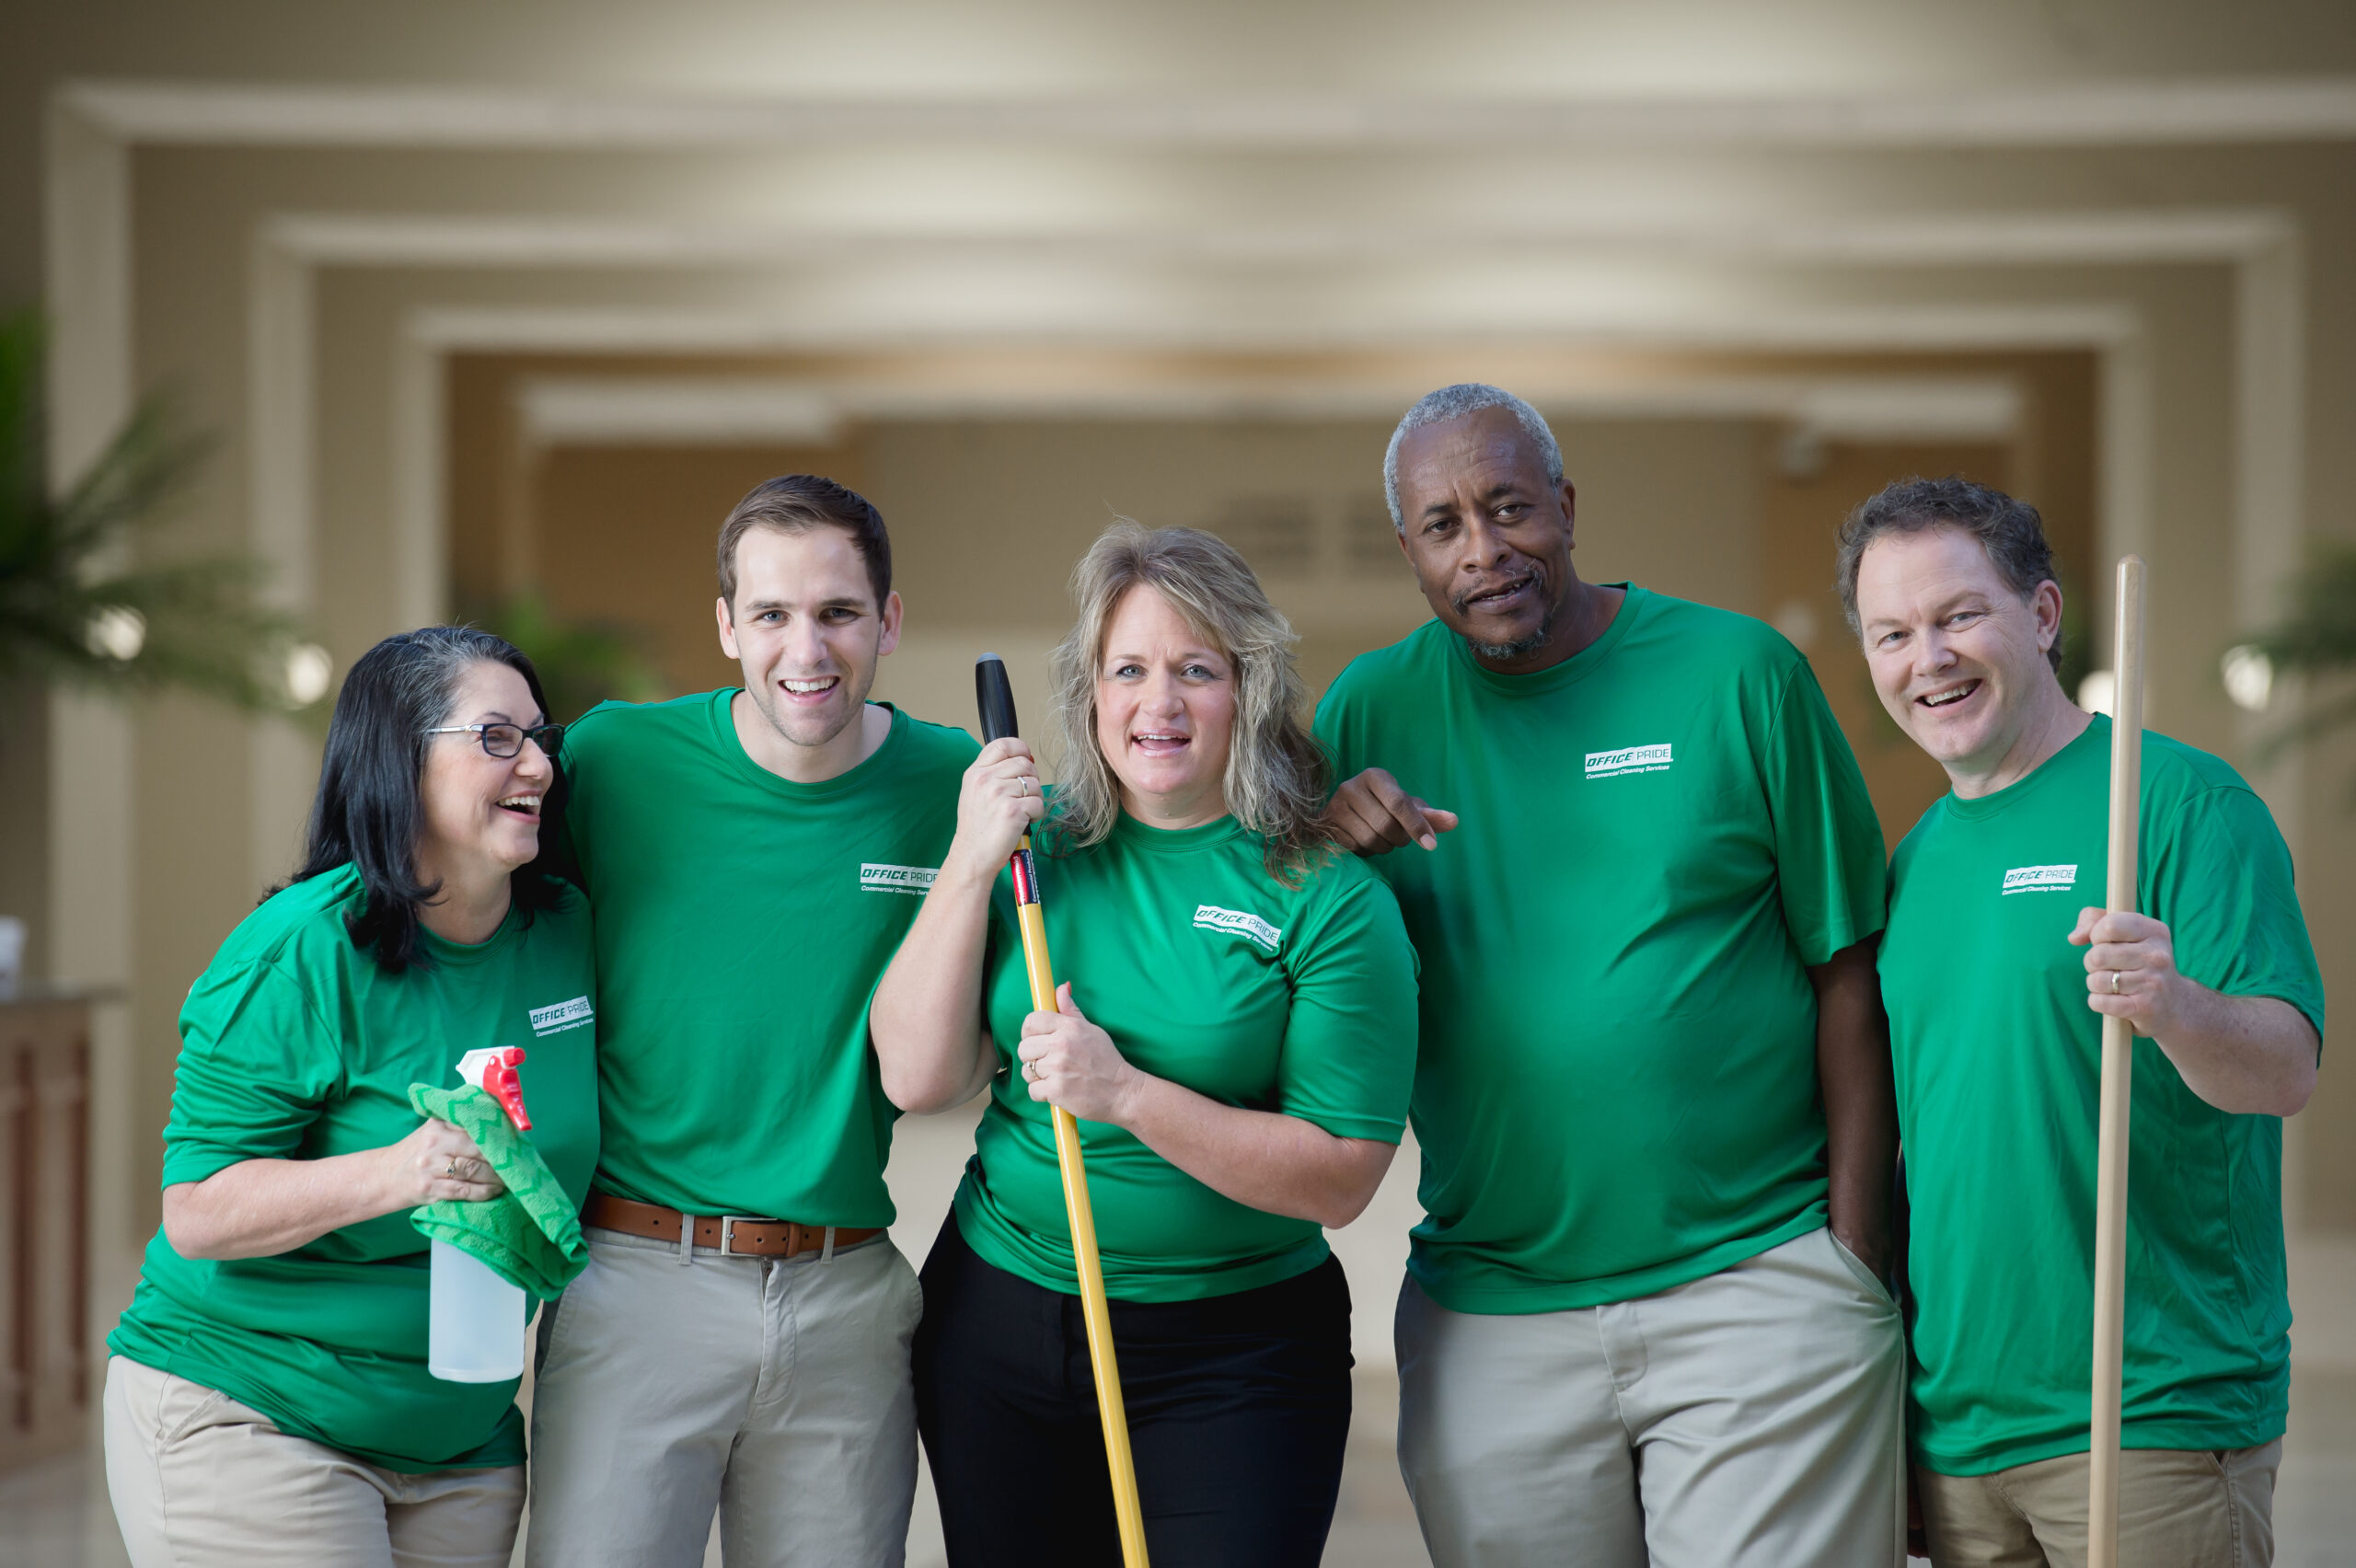 Commercial cleaning professional team group picture holding cleaning accessories